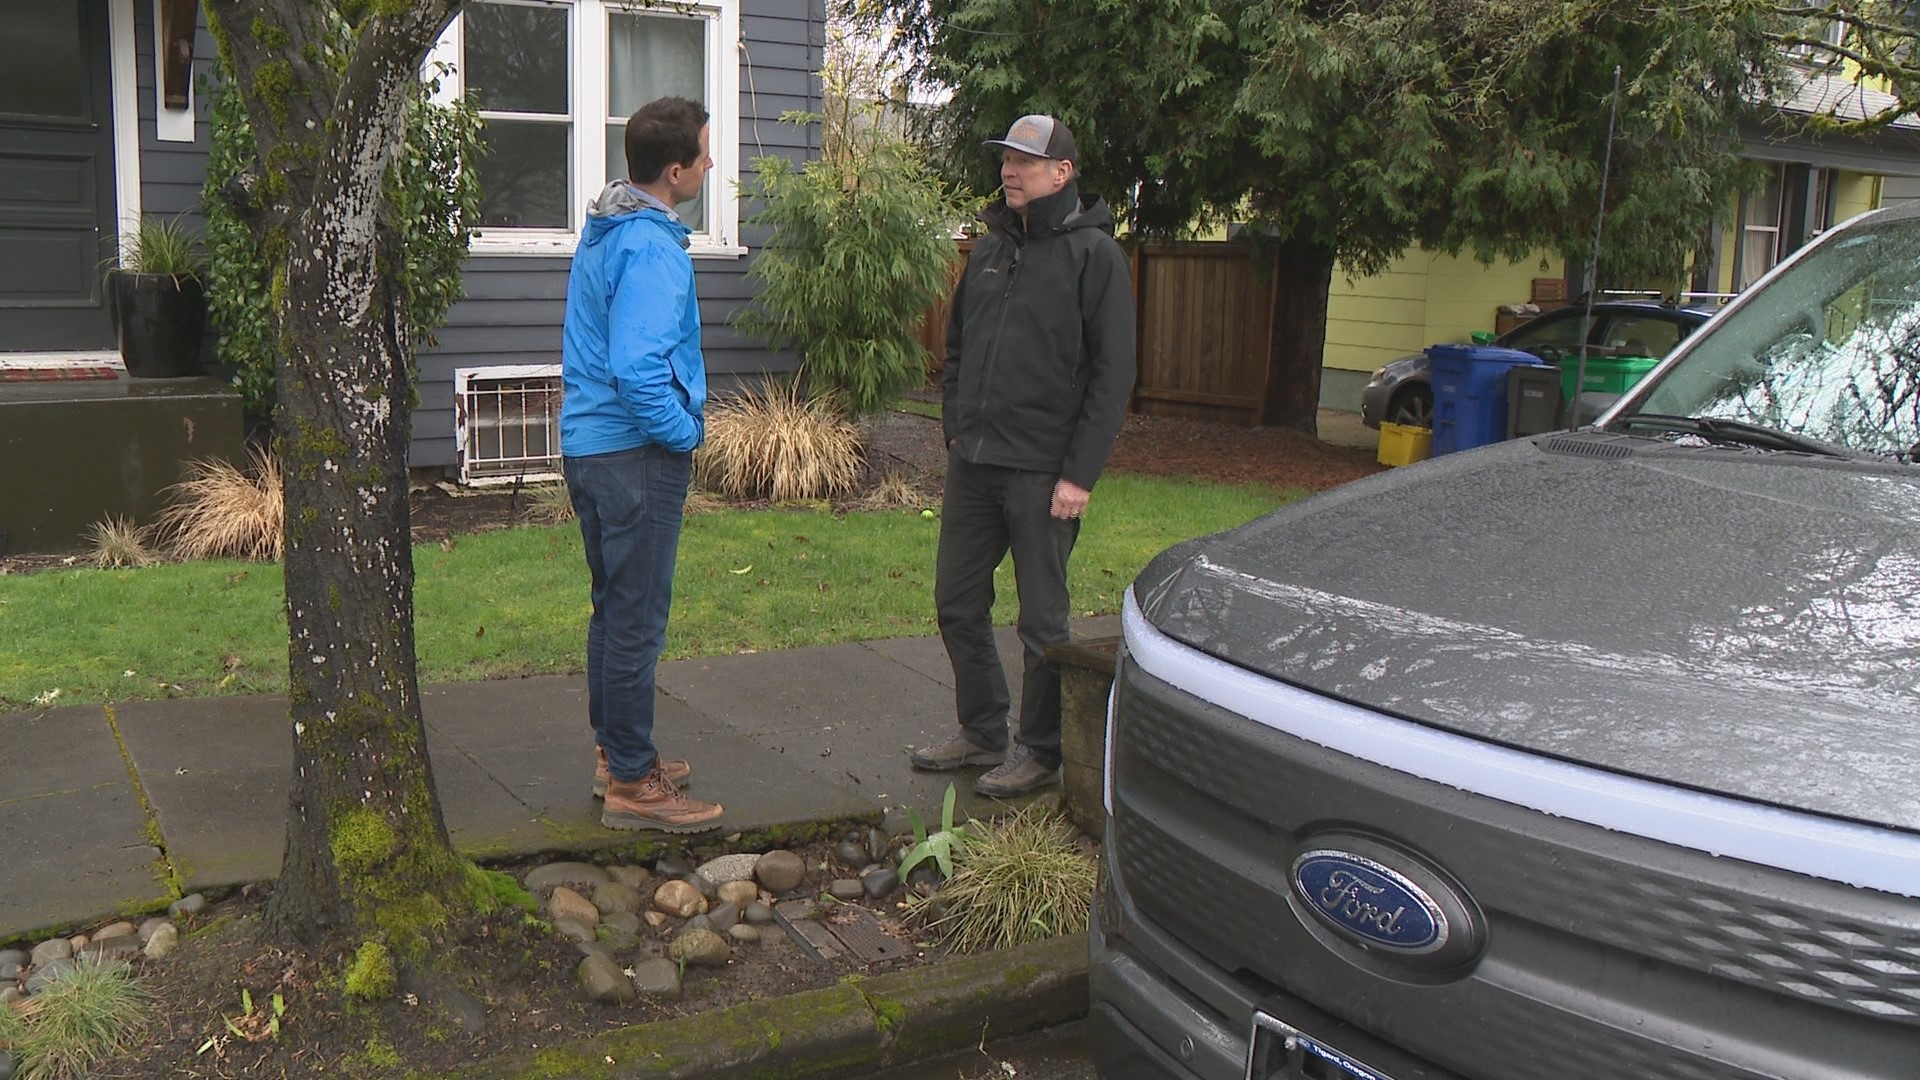 PGE is rolling out an initiative to promote at-home charging, and ODOT is stepping up maintenance at charging stations statewide.